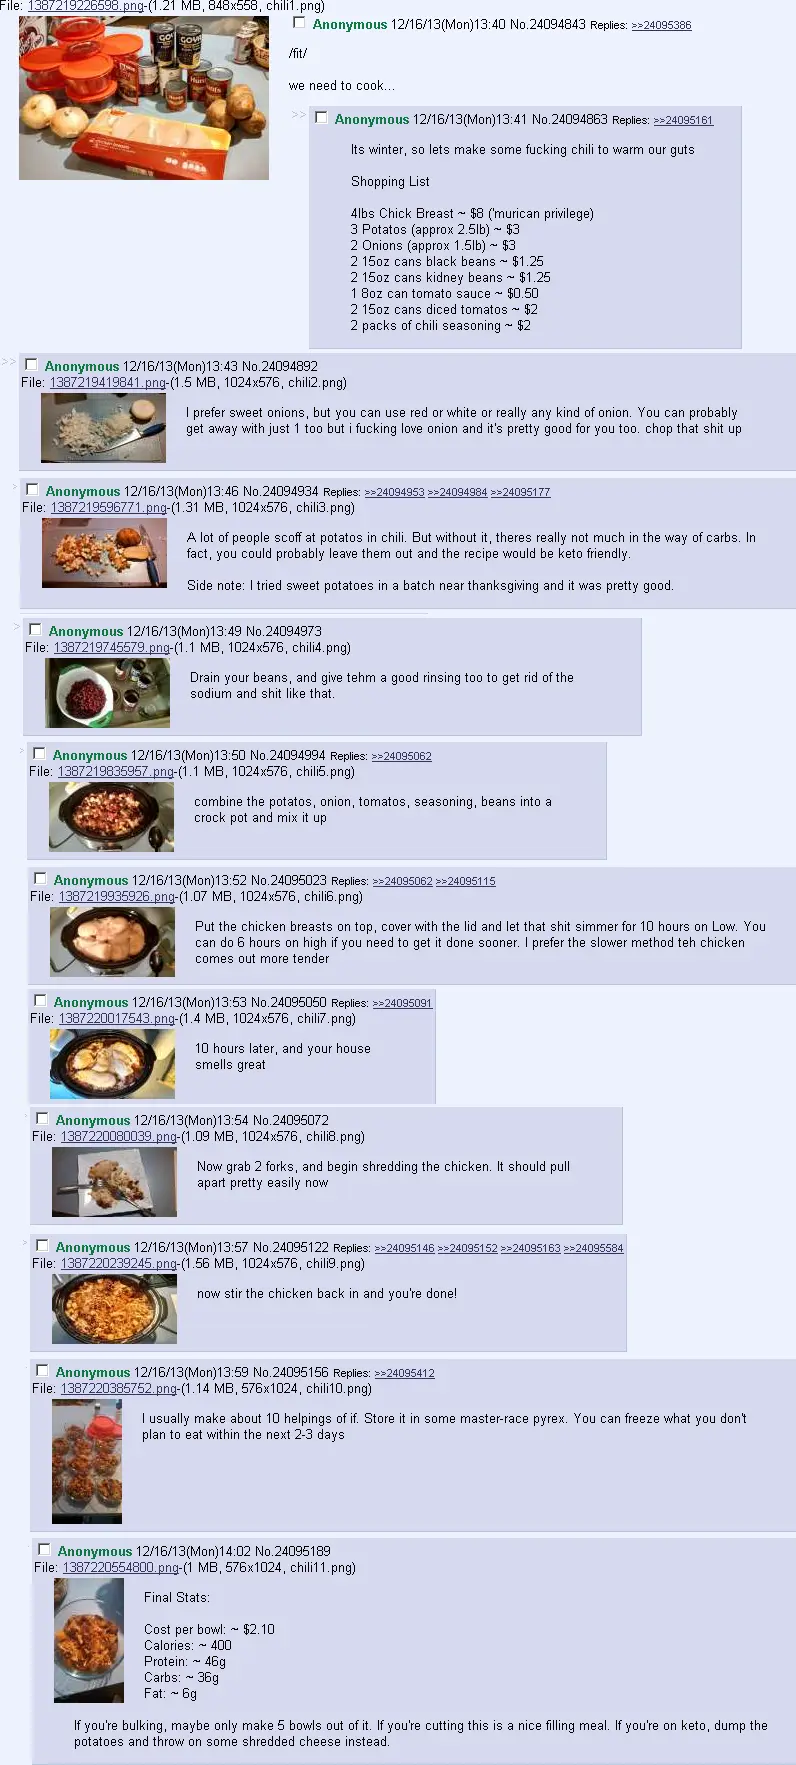 /fit/ recipe - We need to cook Chili